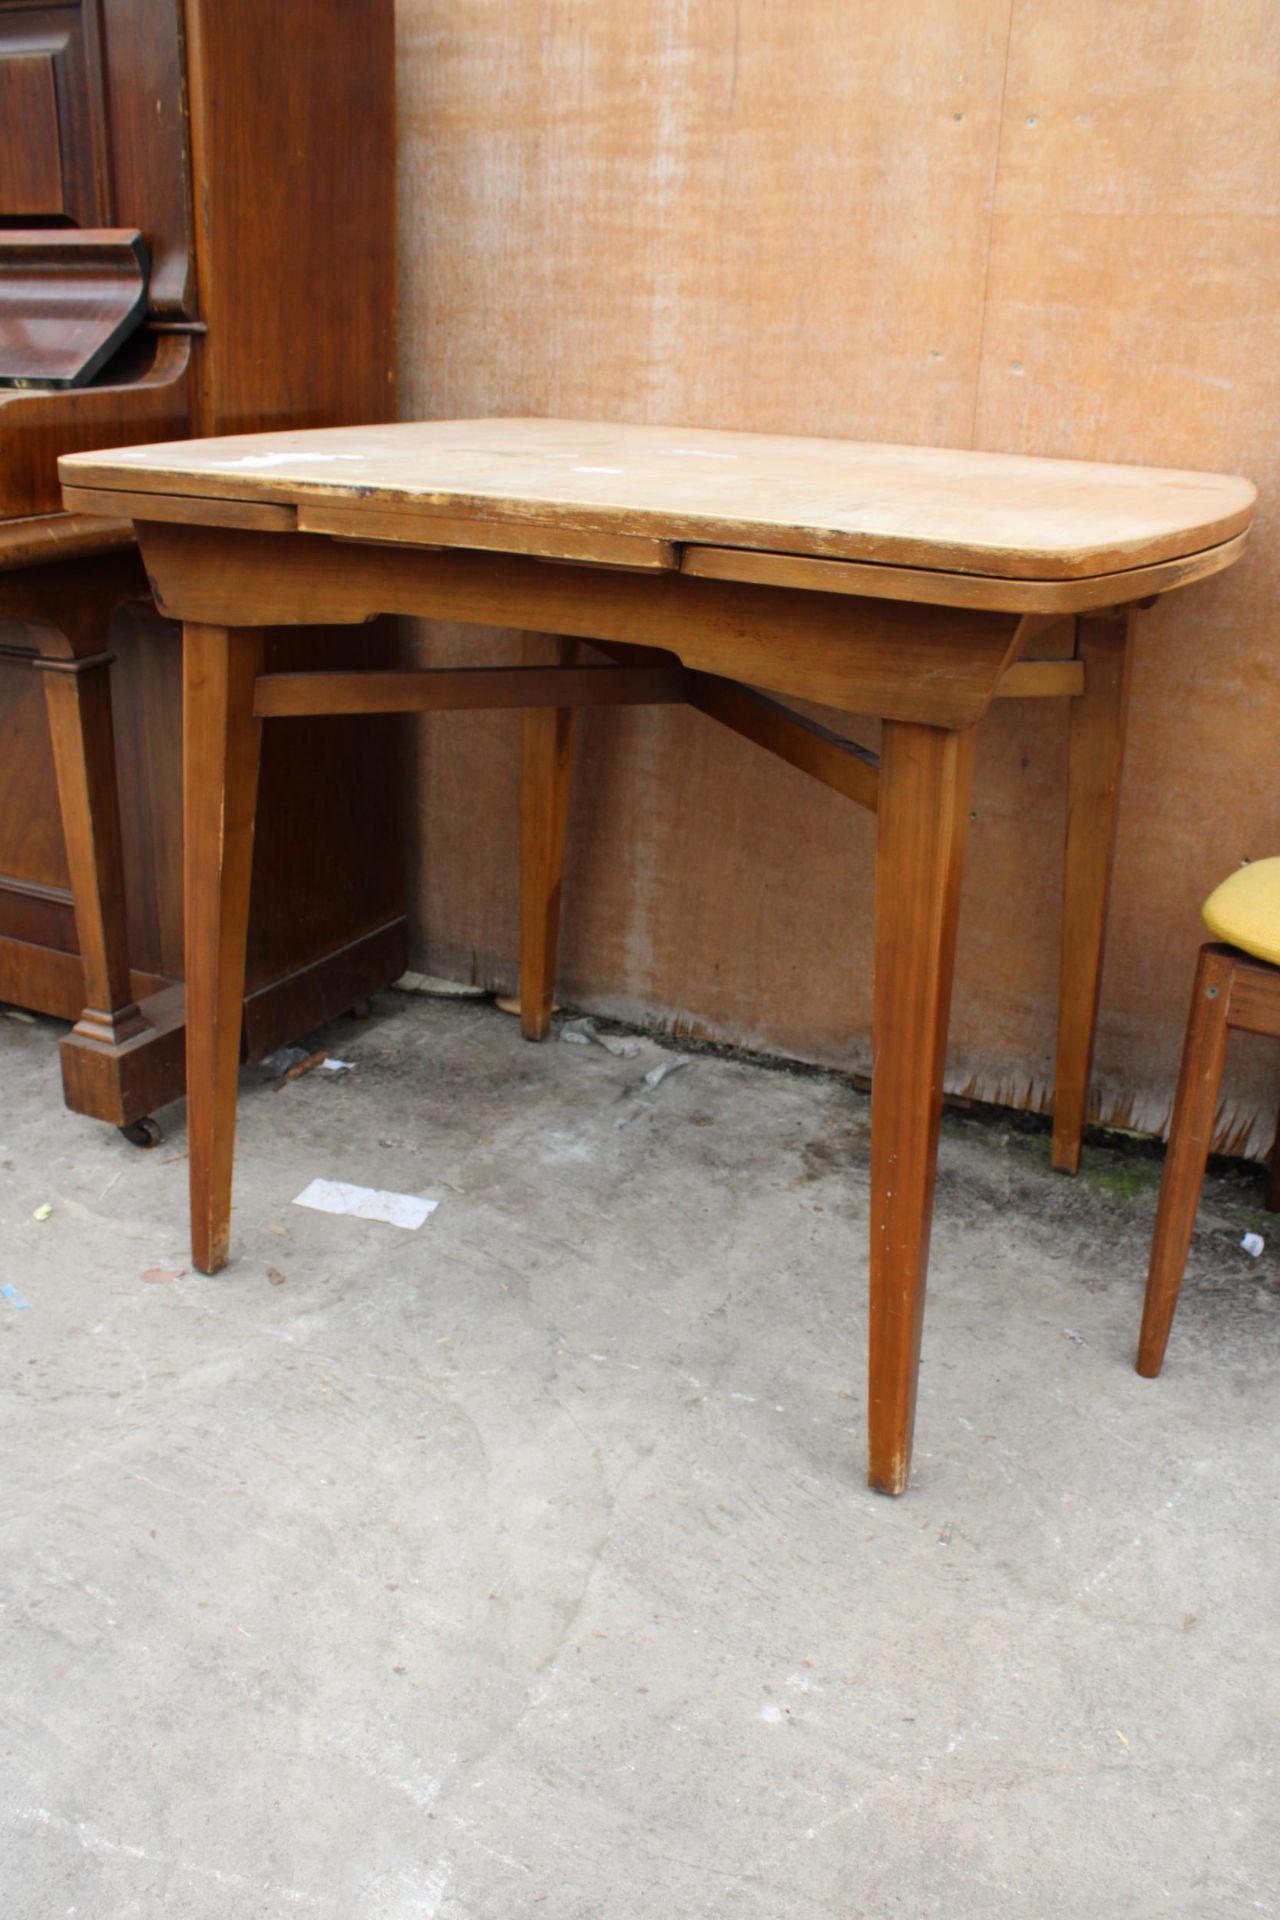 A MID 20TH CENTURY DRAW LEAF DINING TABLE - Image 2 of 2